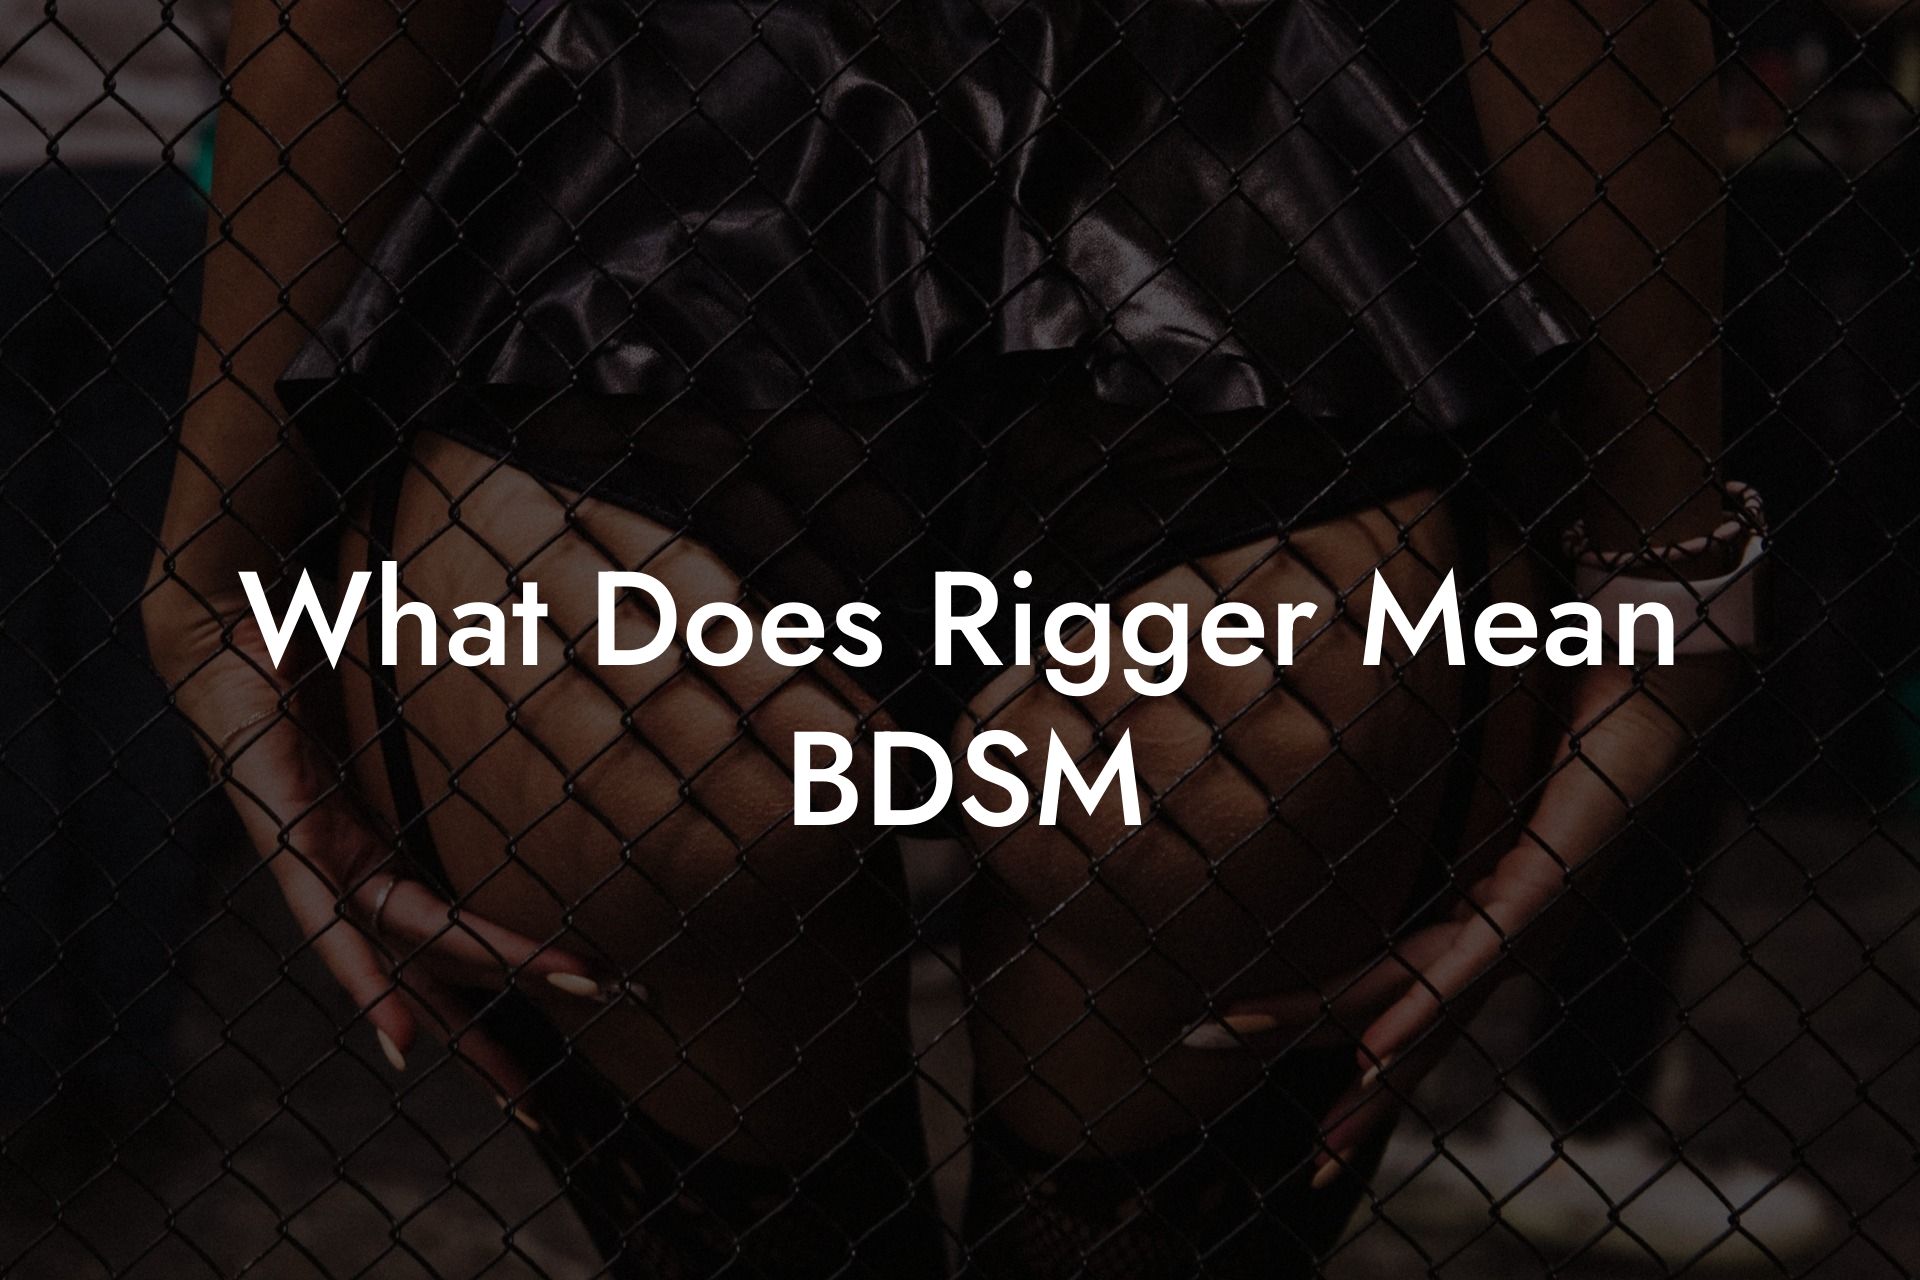 What Does Rigger Mean BDSM